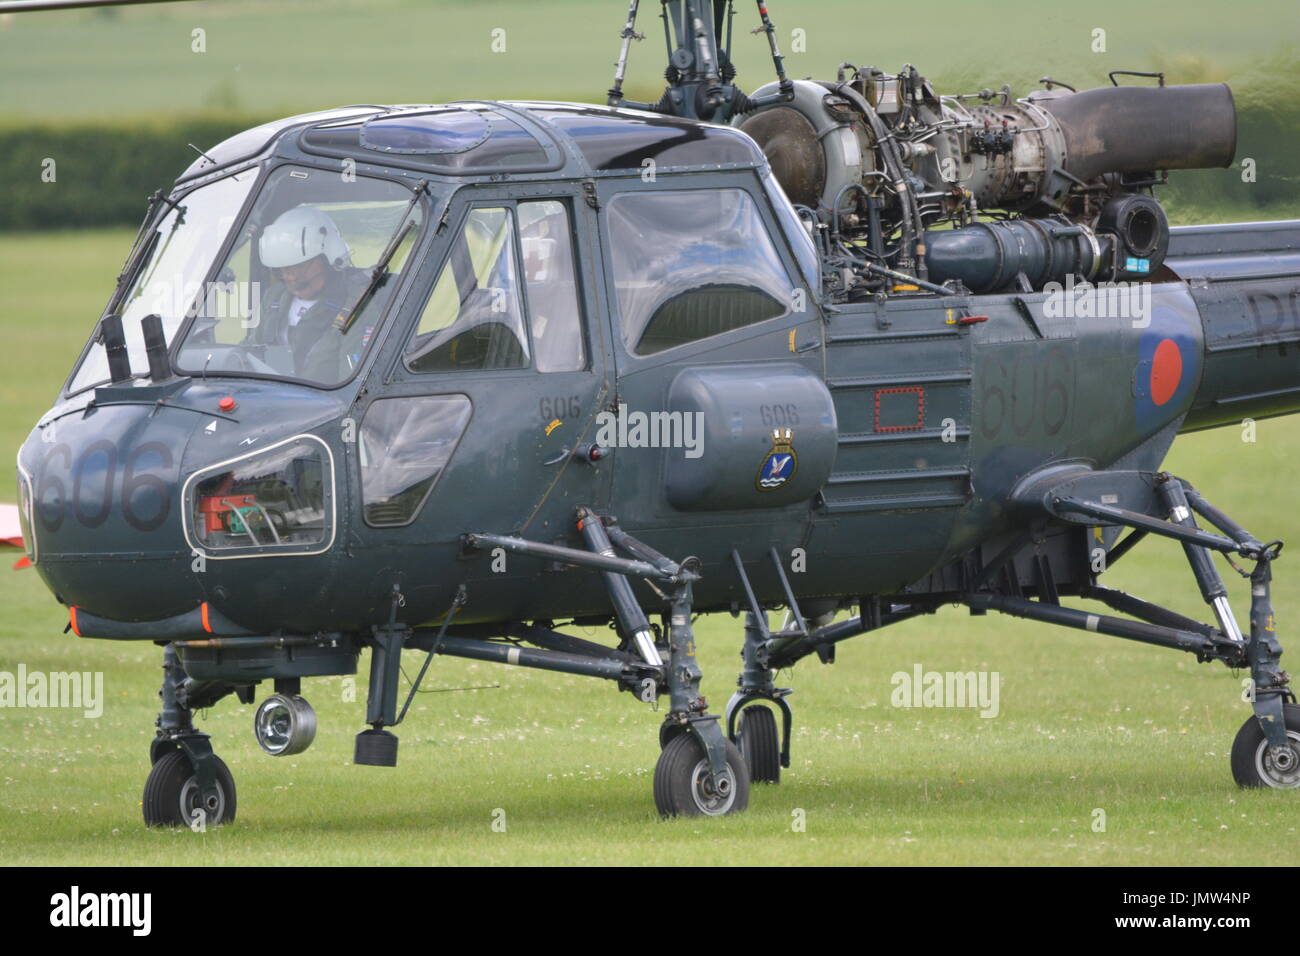 westland wasp navy helicopter at shuttleworth fly navy airshow Stock Photo